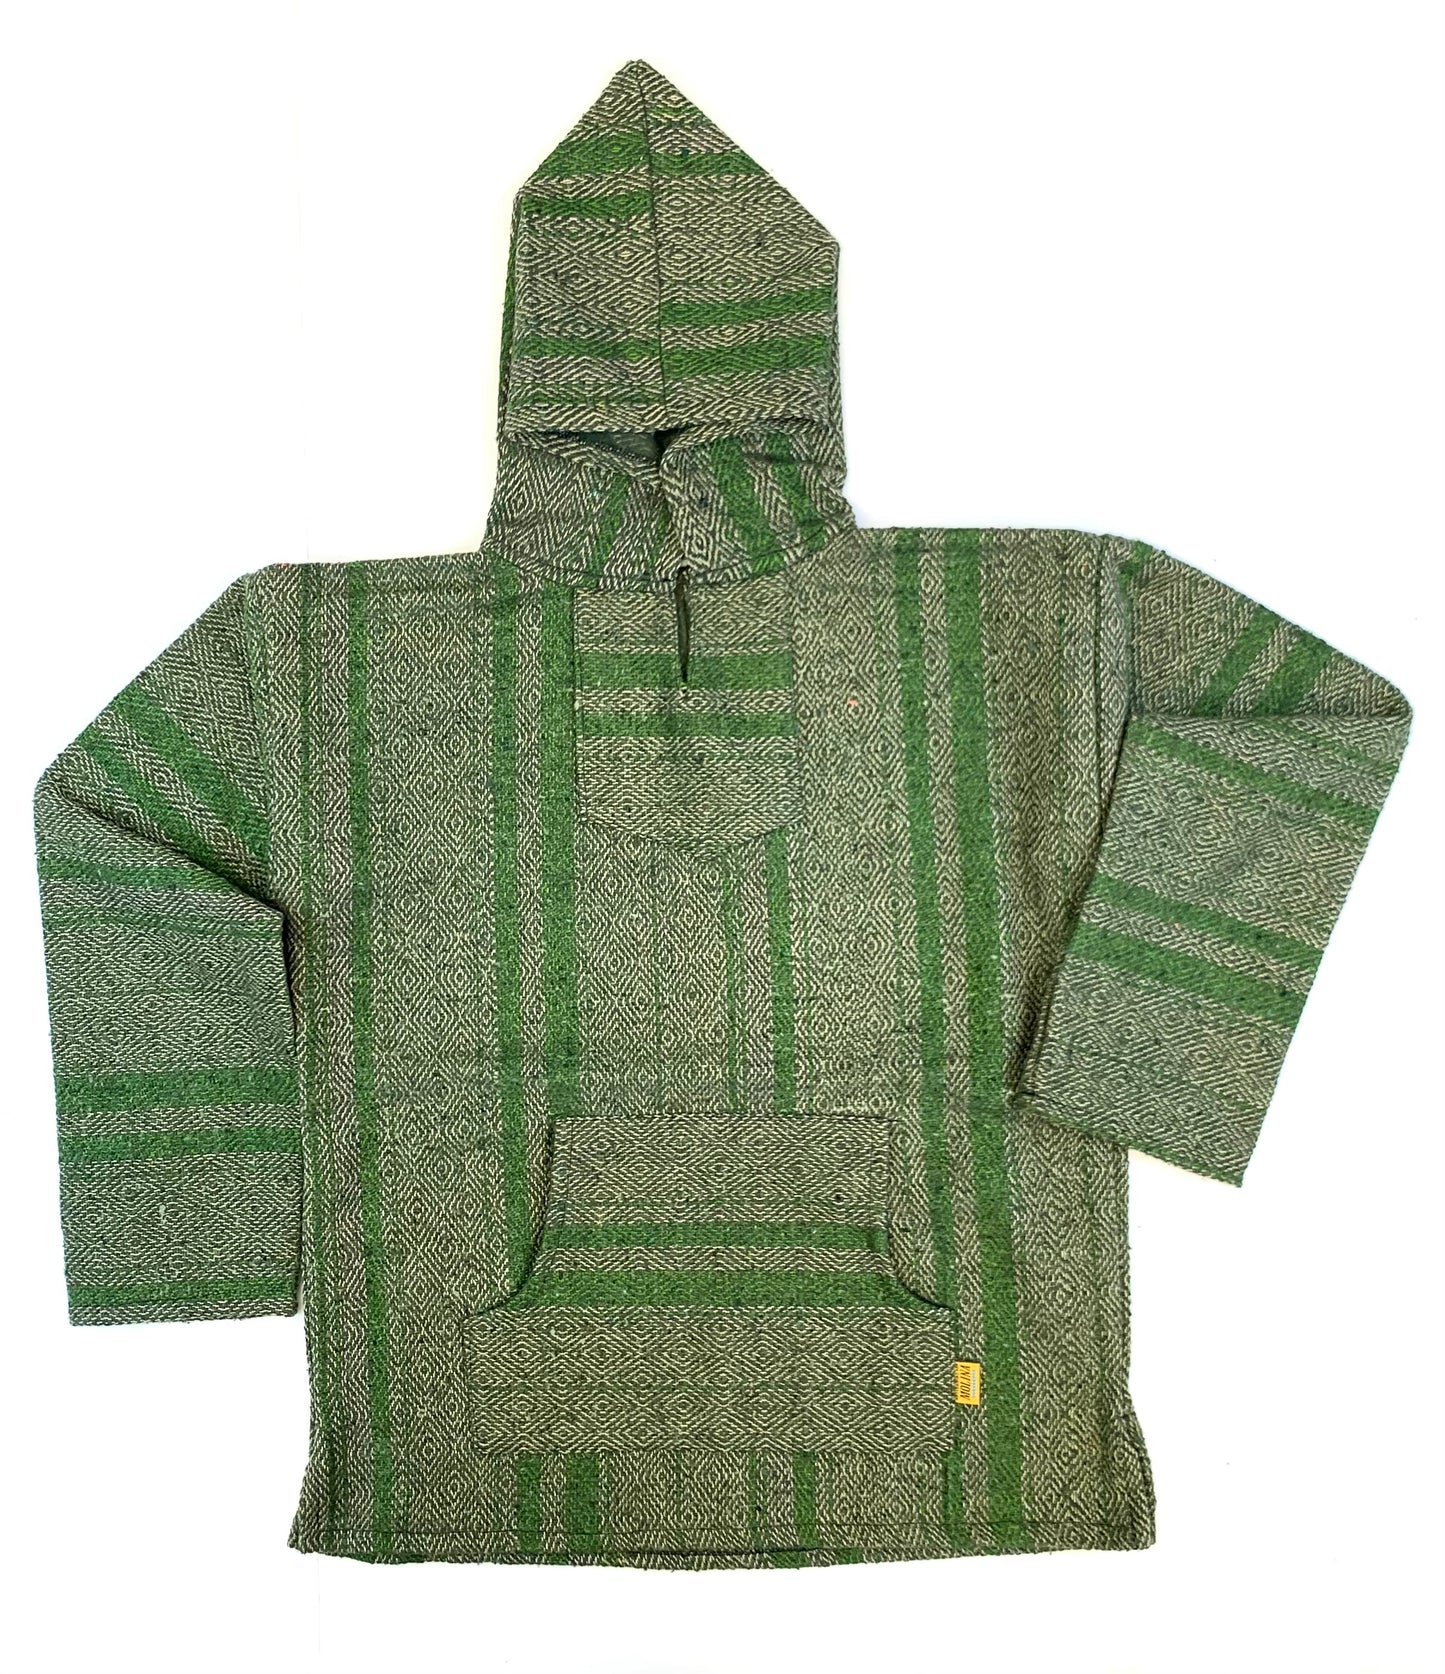 Limited Time Children's X-Large Mexican Baja Hoodies